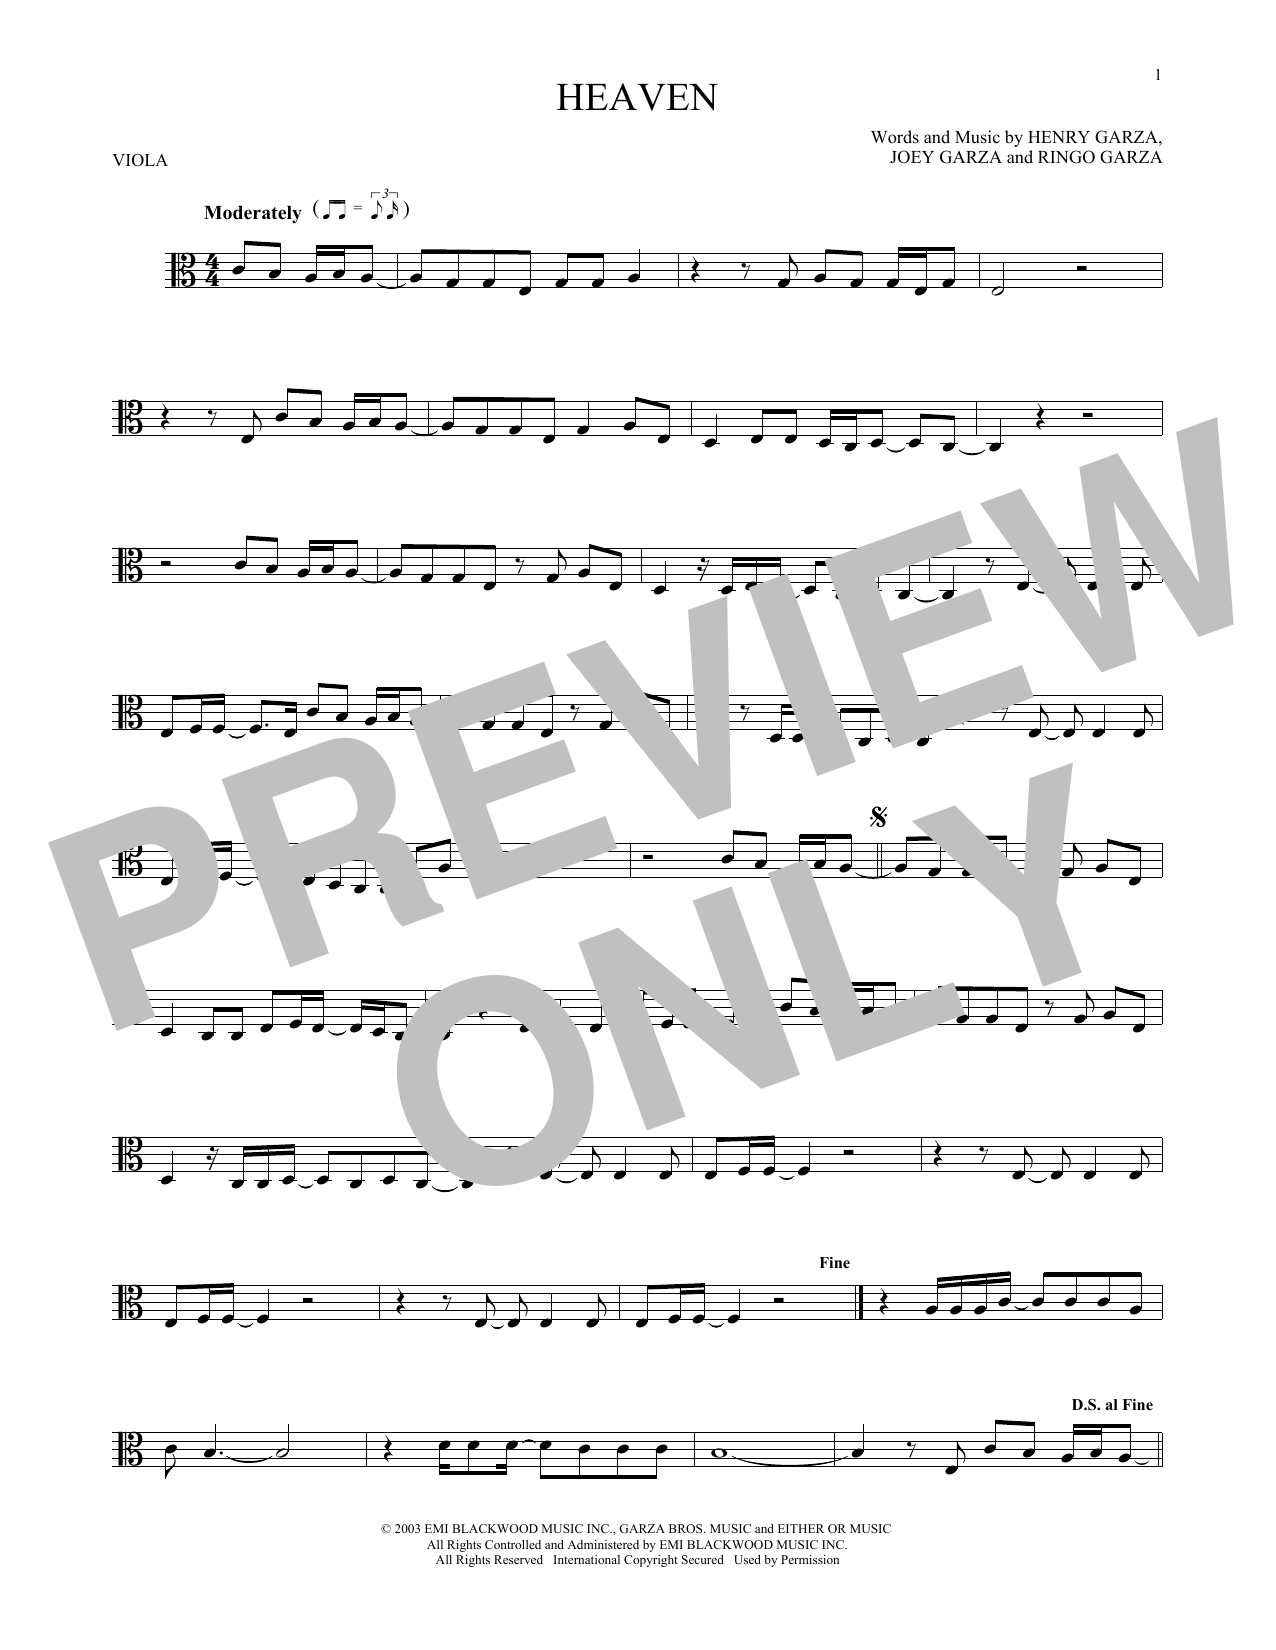 Download Los Lonely Boys Heaven Sheet Music